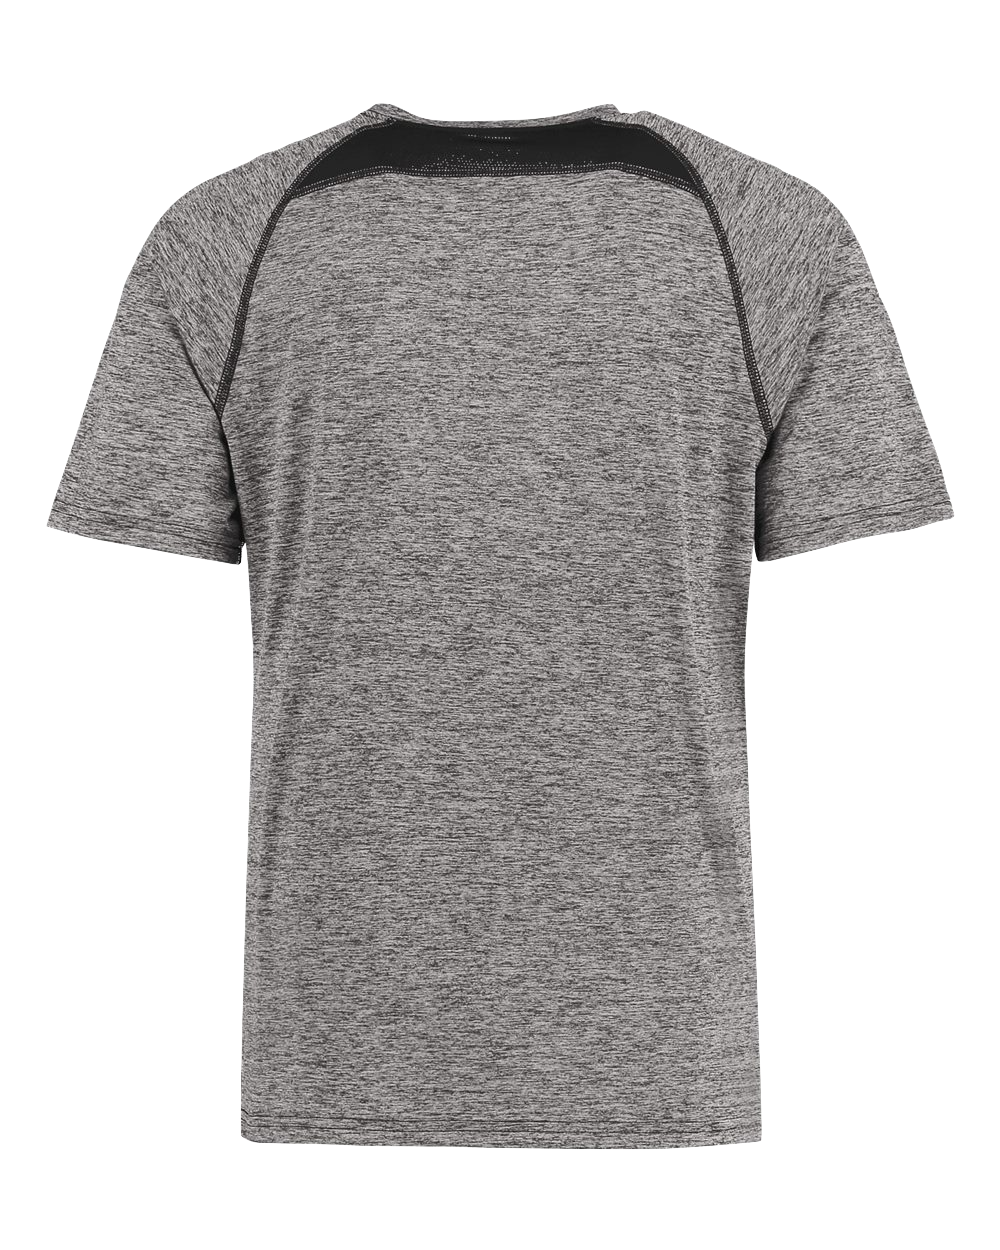 ONE IN ONE HUNDRED STACKED Poly/Elastane High Performance T-Shirt with UPF 50+